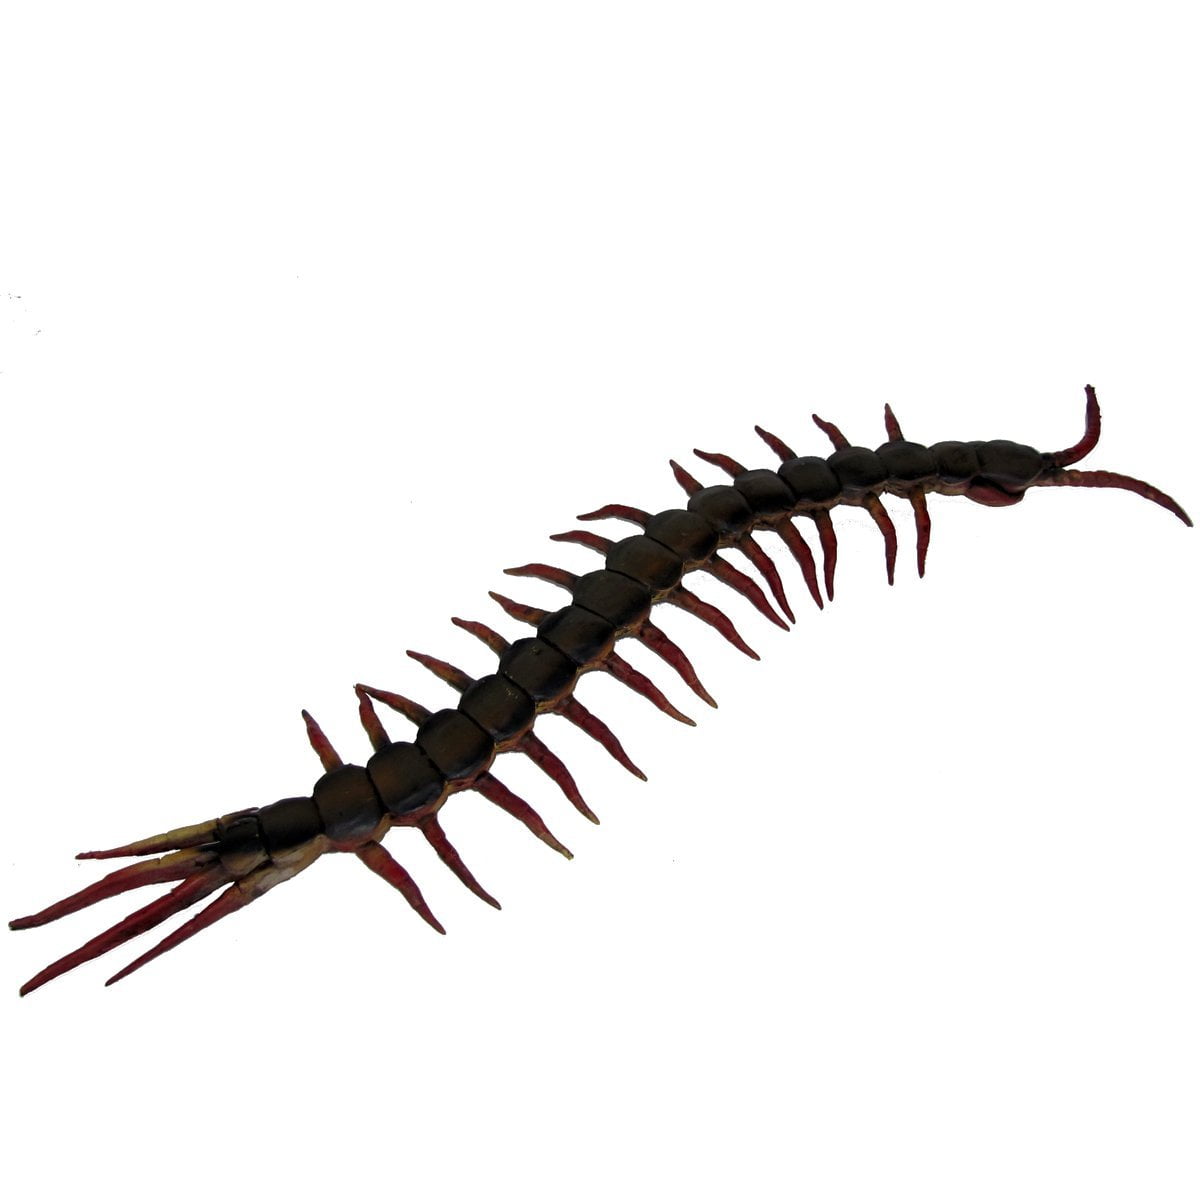 Lifelike Giant 3 Foot Centipede Rubber Toy by, Great theatre prop, Hallowee...